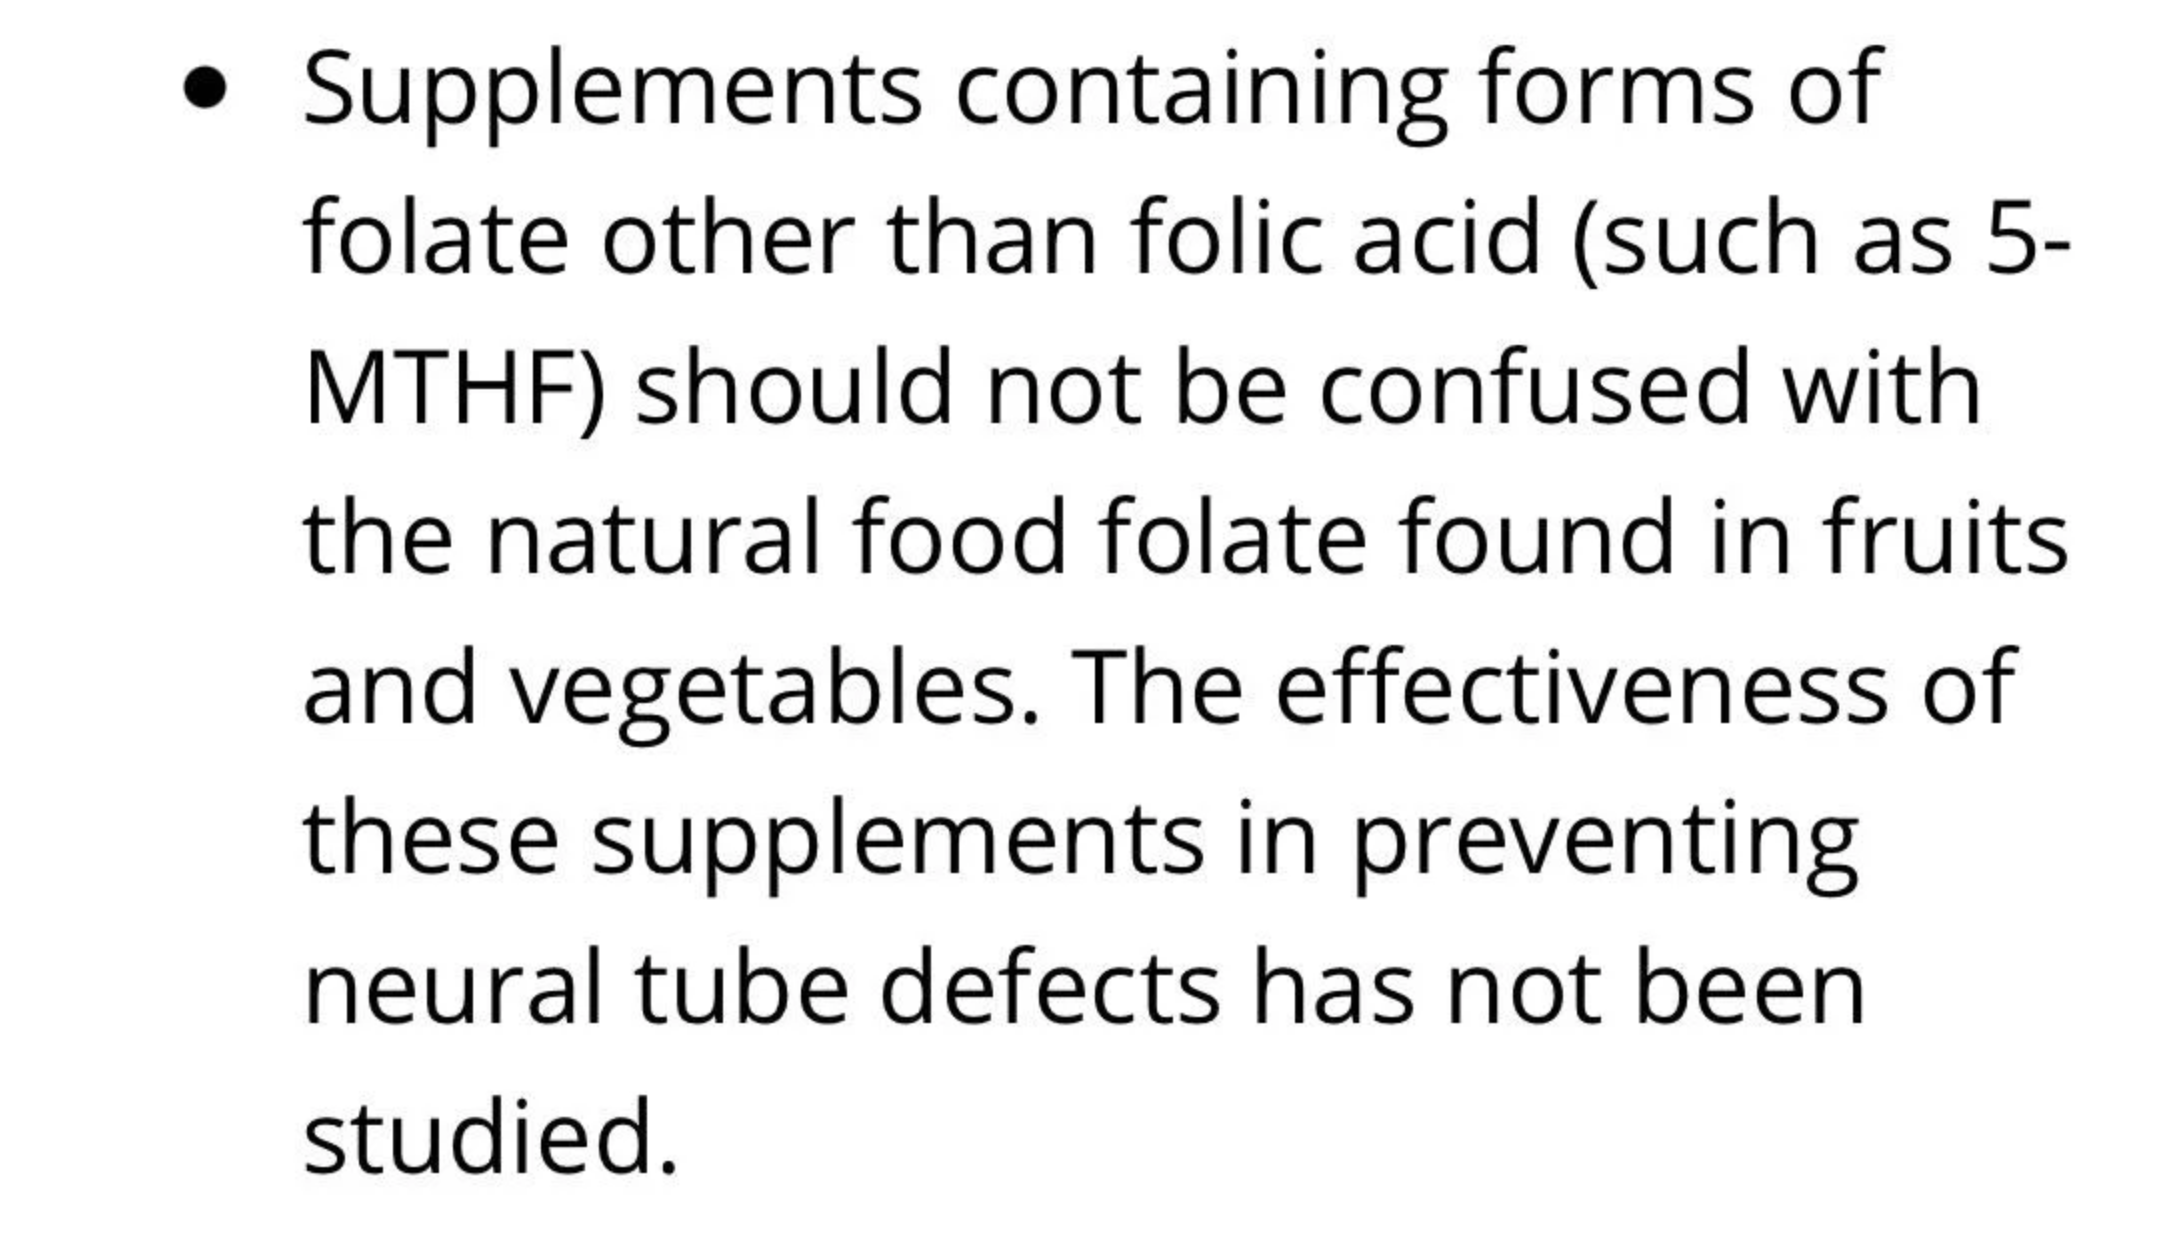 &quot;Supplements containing forms of folate other than folic acid shouldn&#x27;t be confused with the natural food folate found in fruits and vegetables; the effectiveness of these supplements in preventing neural tube defects has not been studied&quot;